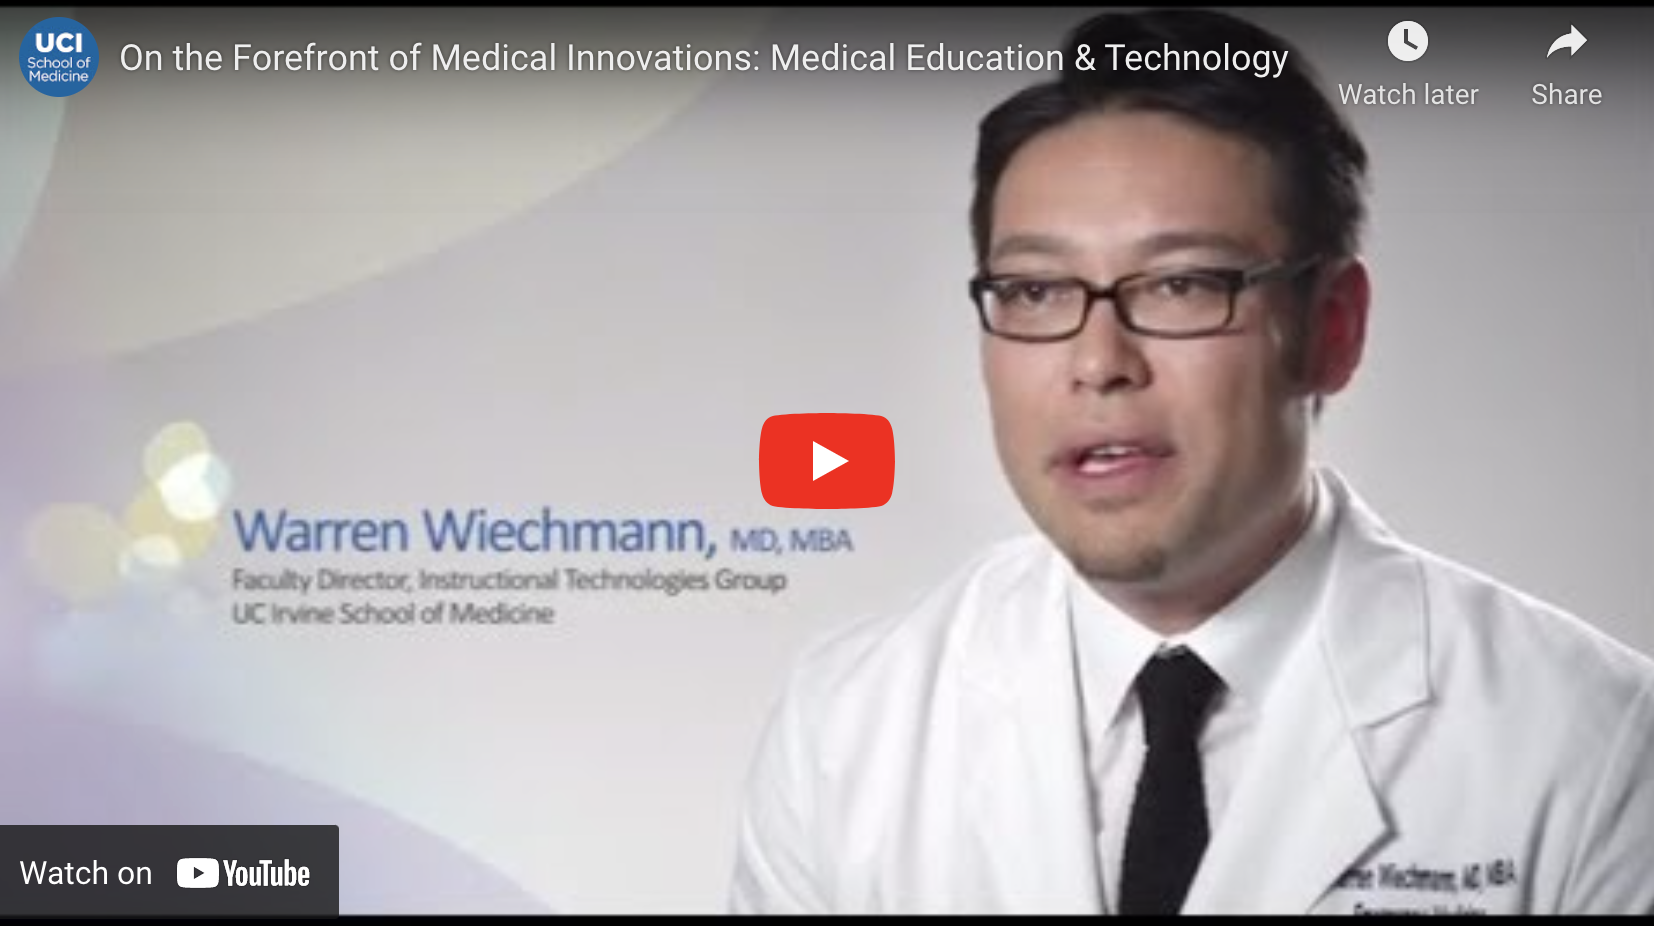 On the Forefront of Medical Innovations: Medical Education & Technology